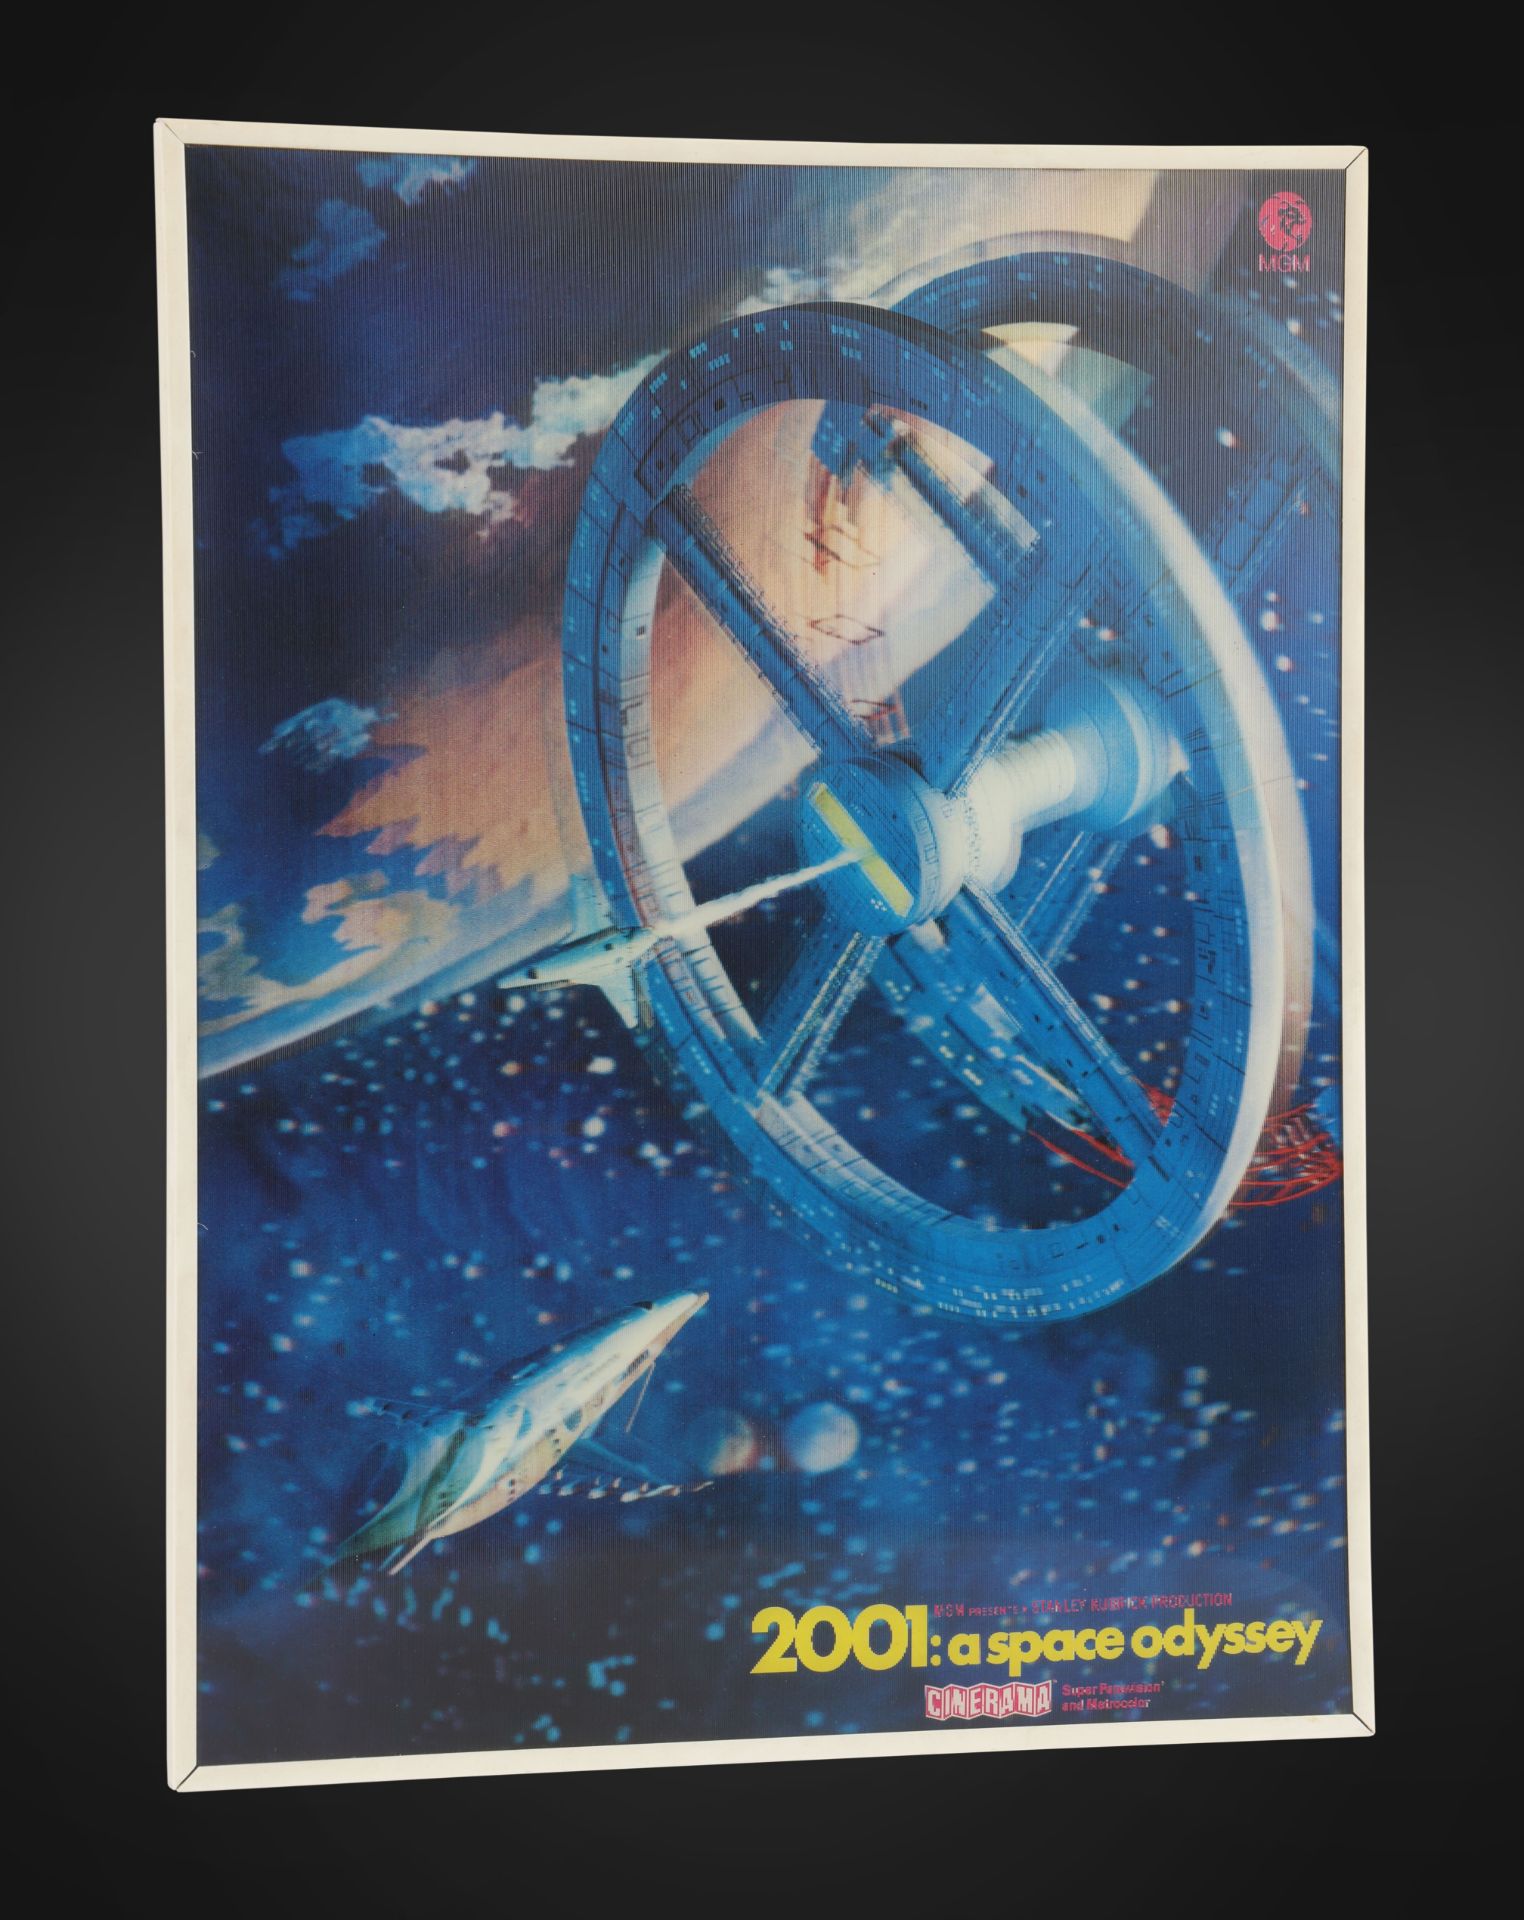 2001: A SPACE ODYSSEY (1968) - David Frangioni Collection: Cinerama 3D Lenticular - Style A, 1968 - Image 2 of 3